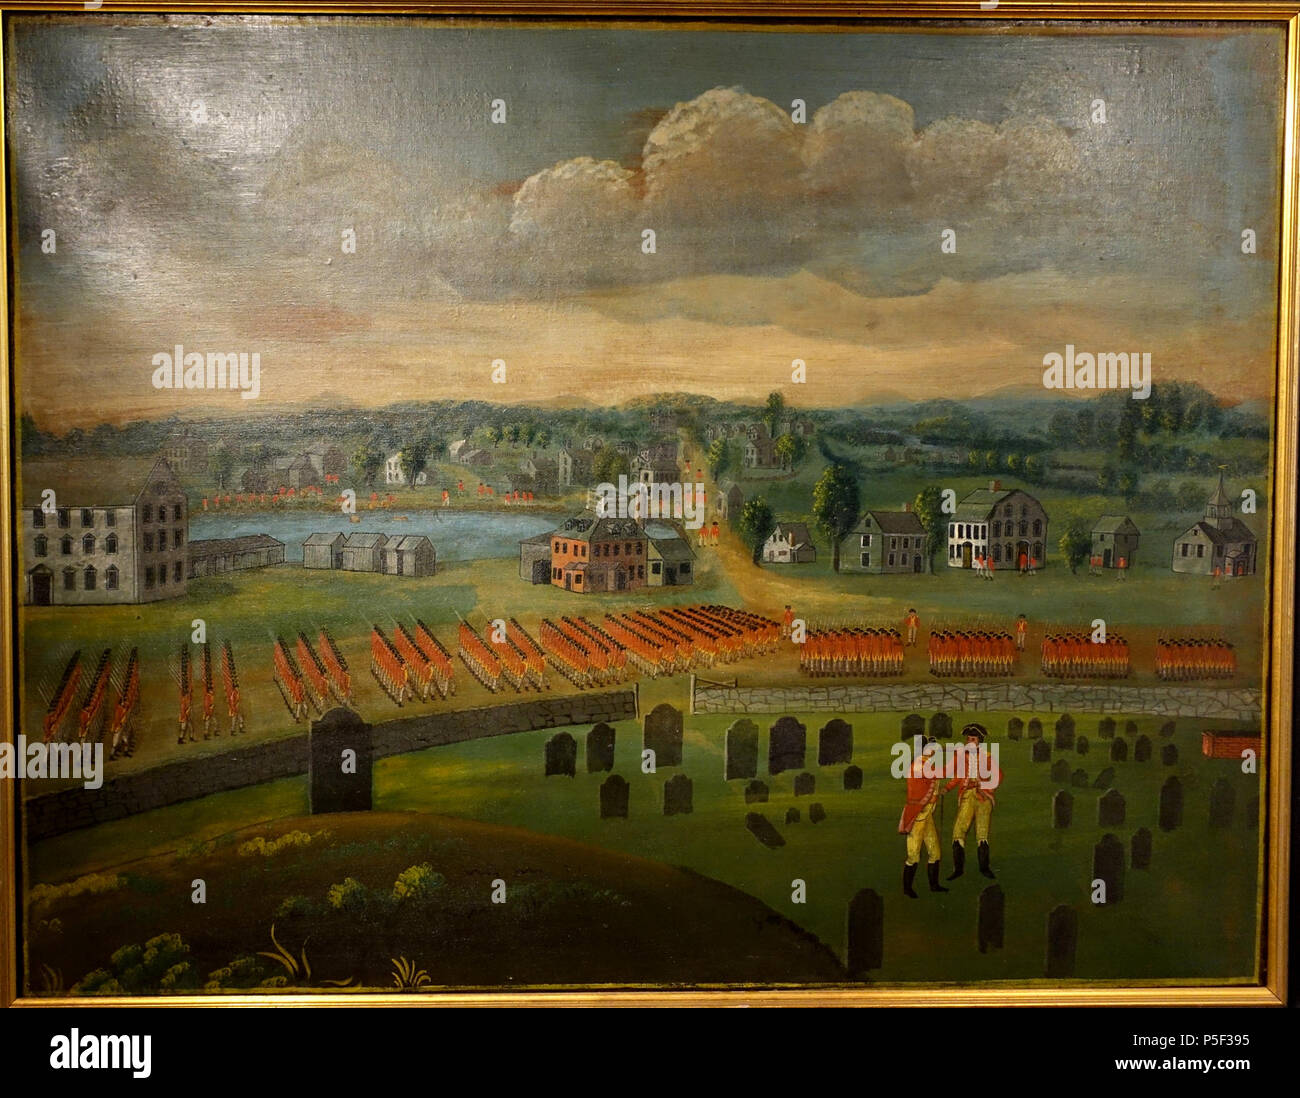 N/A. English: Exhibit in the Concord Museum, Concord, Massachusetts, USA. 30 December 2014, 13:46:59. Daderot 47 A View of the Town of Concord, attributed to Timothy Martin Minot (1757-1837), Concord, c. 1825, oil on canvas - Concord Museum - Concord, MA - DSC05700 Stock Photo